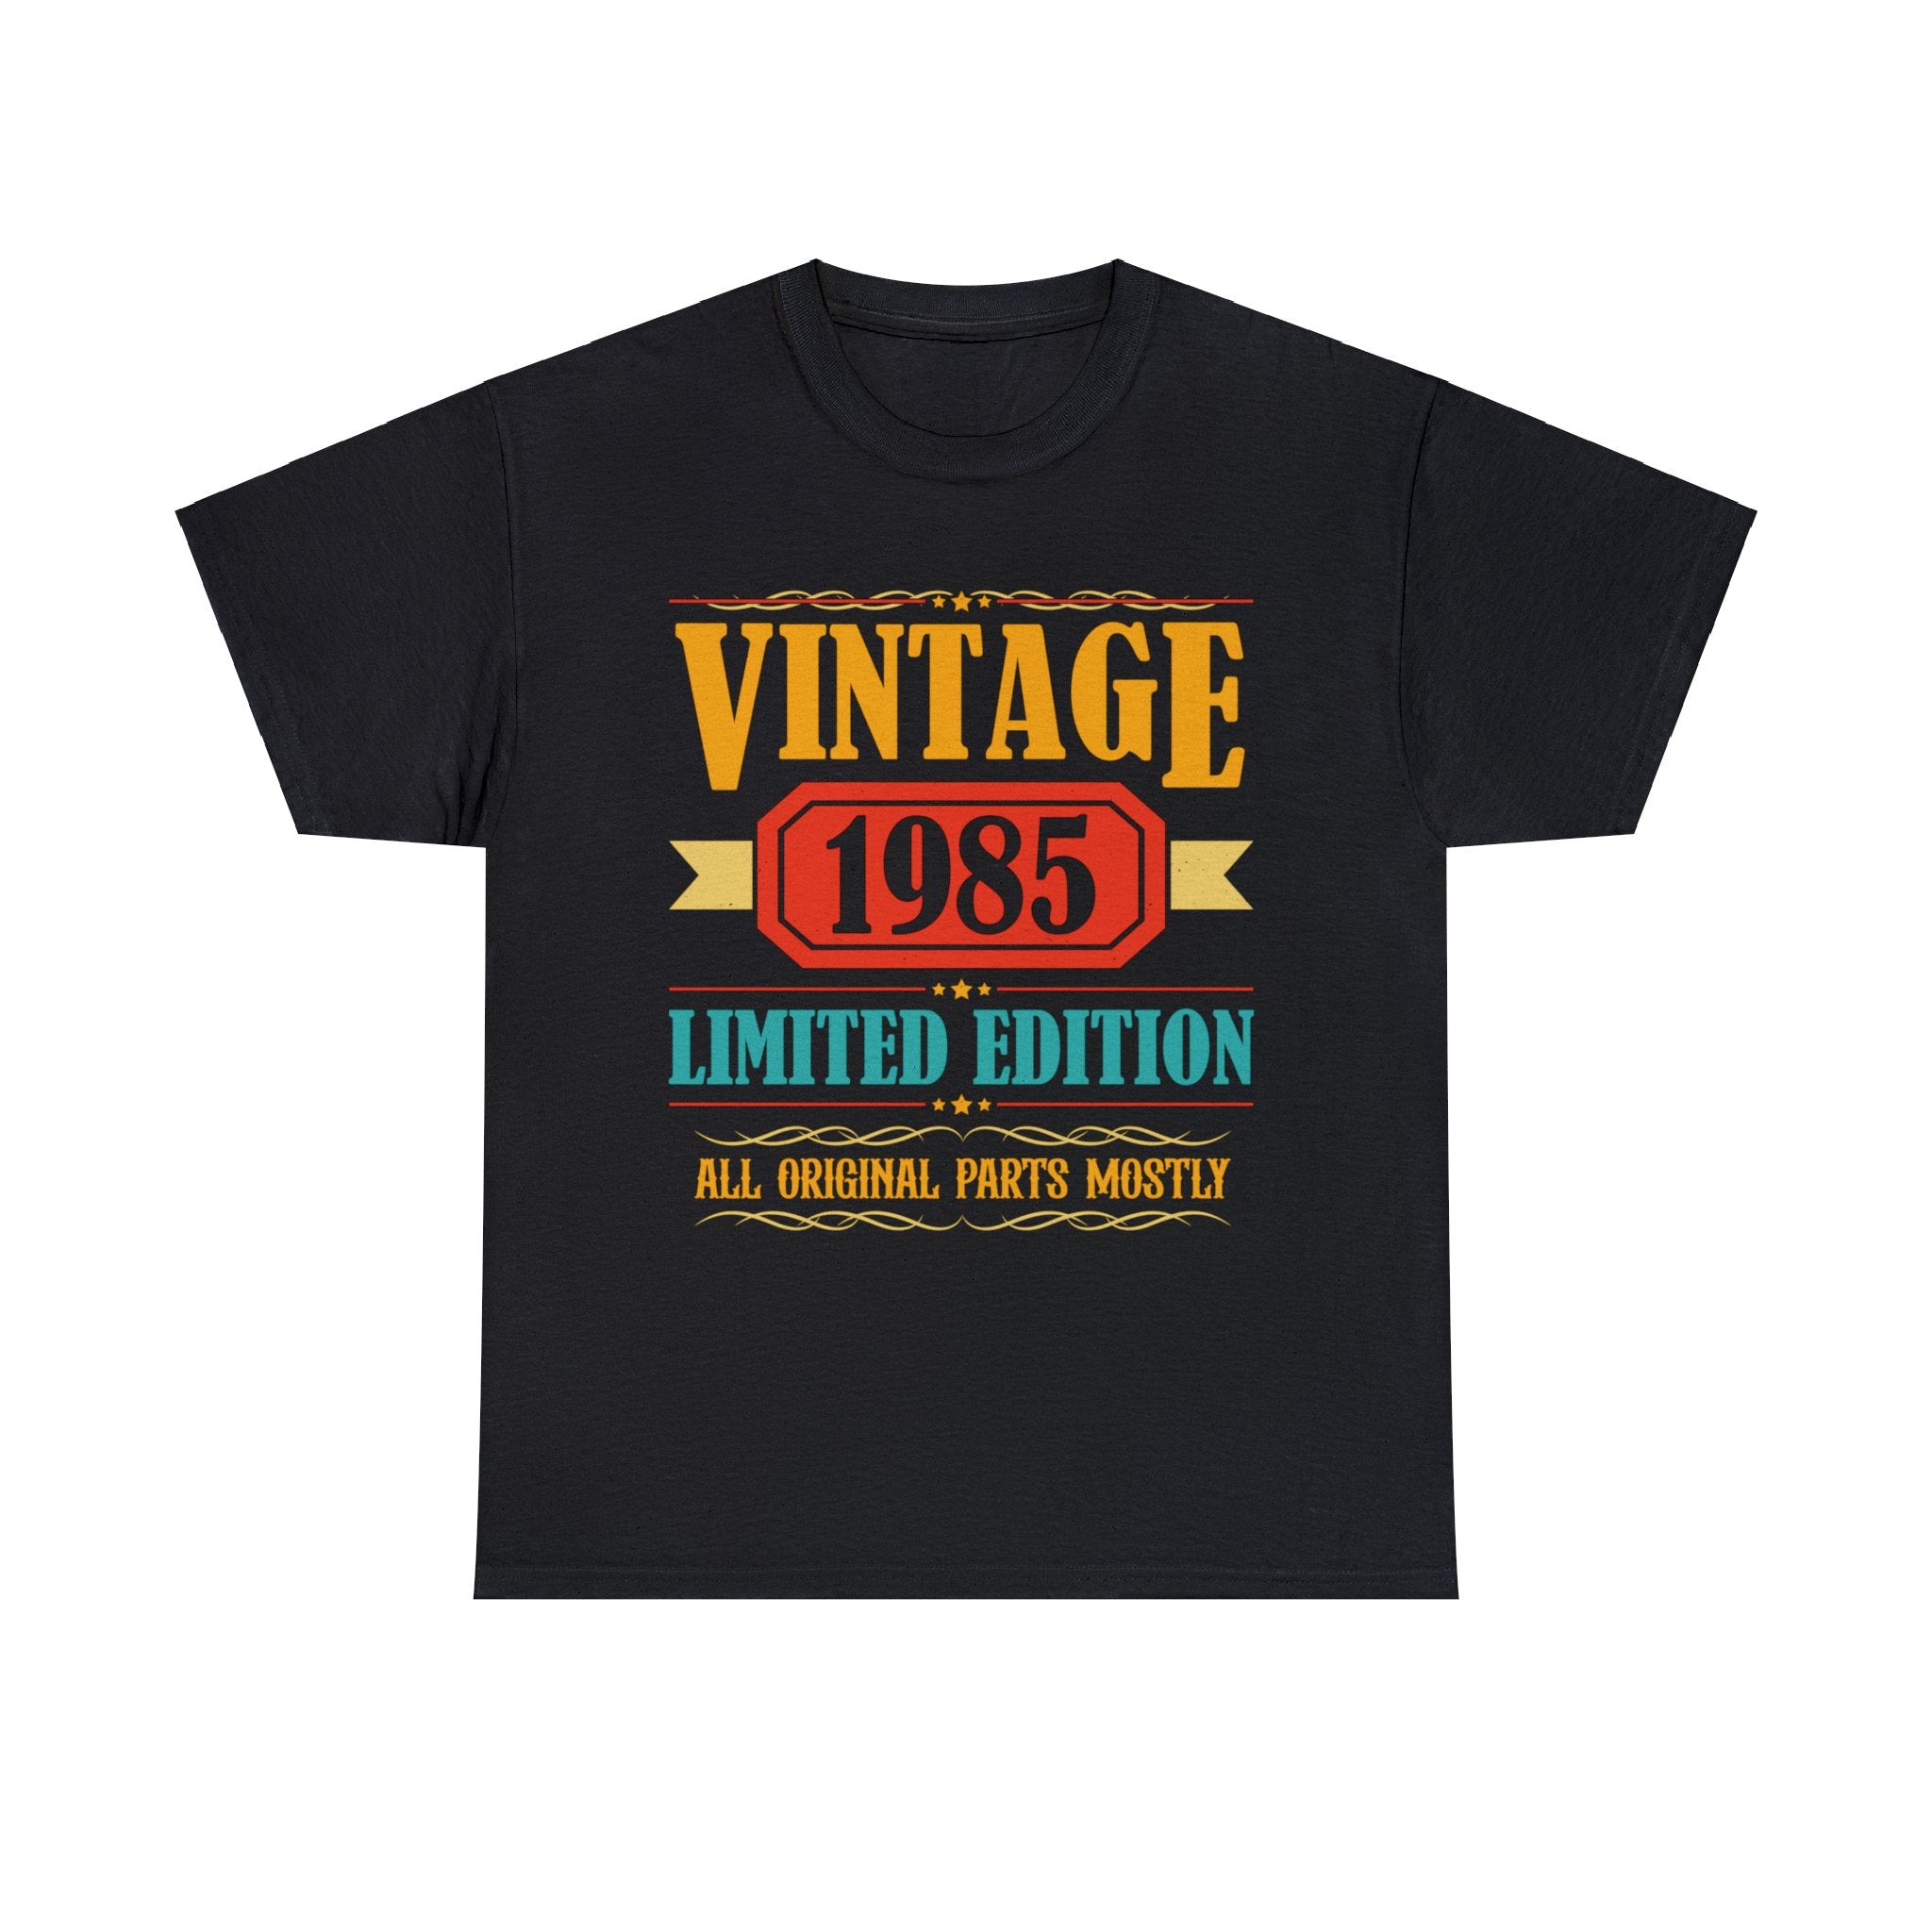 Vintage 1985 T Shirts for Men Retro Funny 1985 Birthday Men Shirts Big and Tall Plus Size